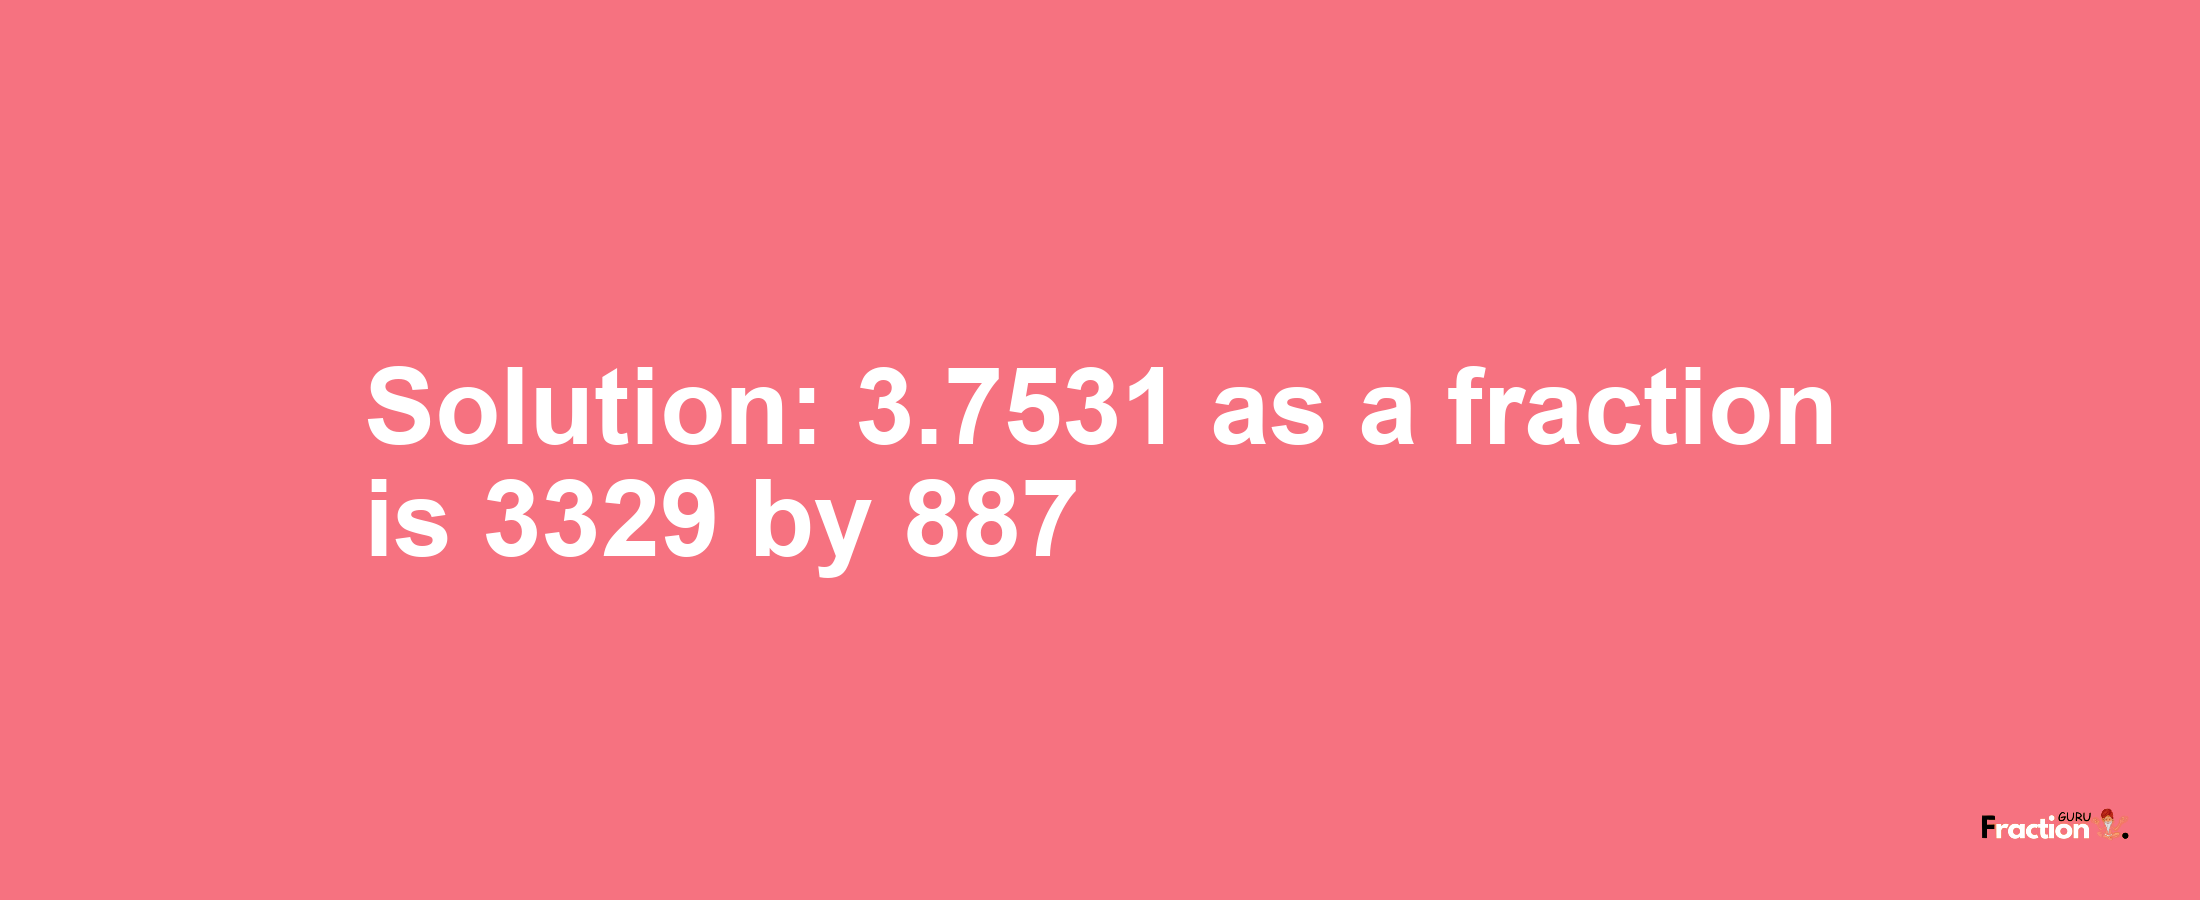 Solution:3.7531 as a fraction is 3329/887